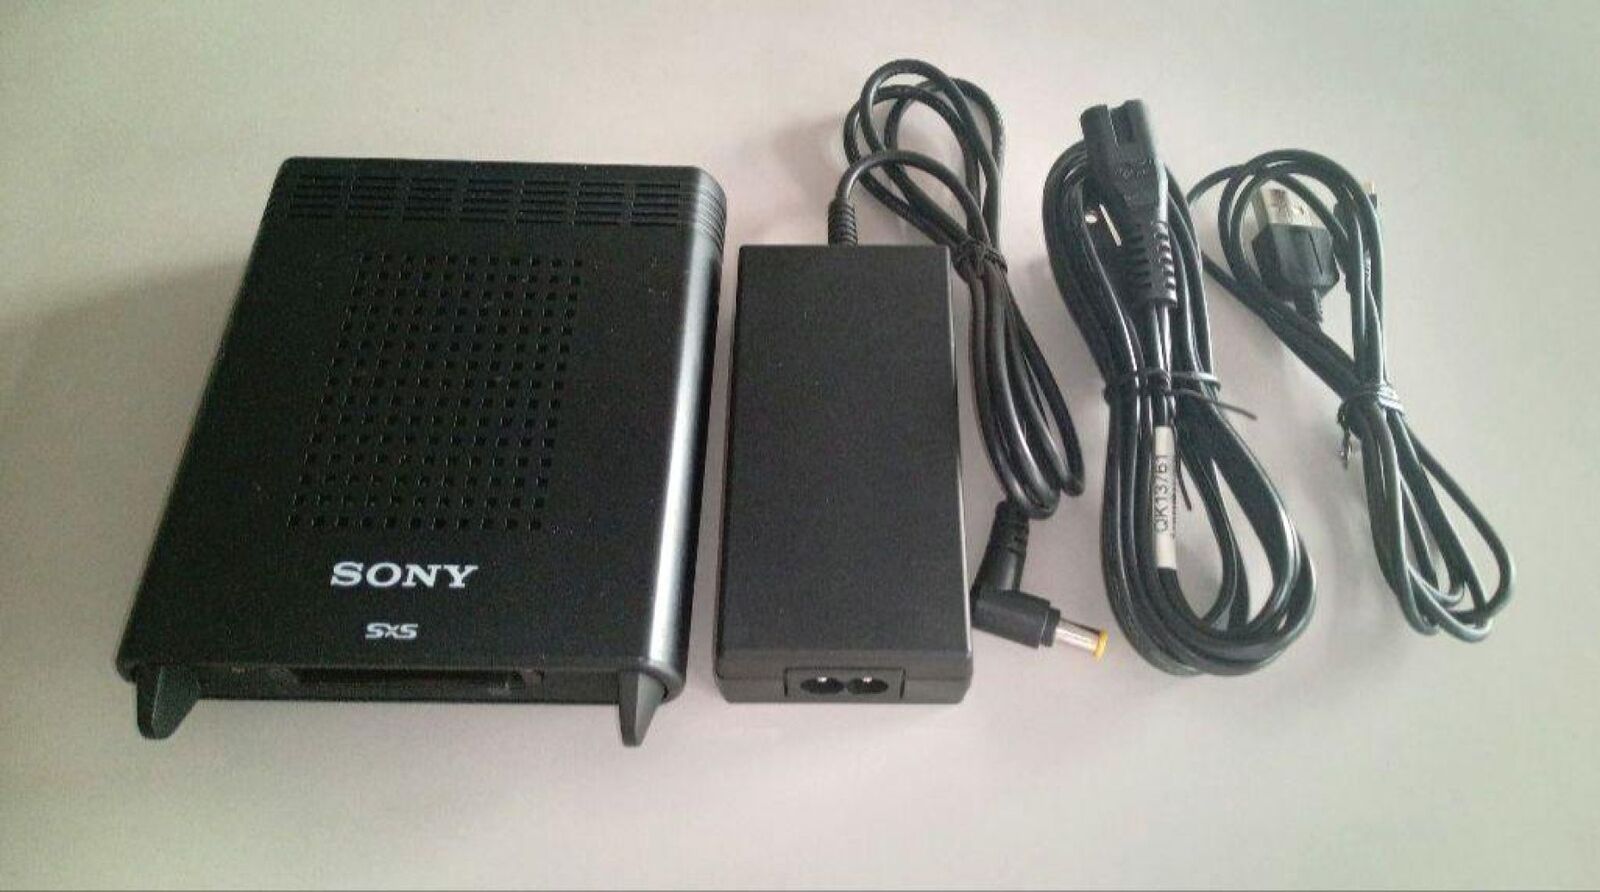 Sony SBAC-US10 SxS Memory Card USB Reader/Writer from Japan